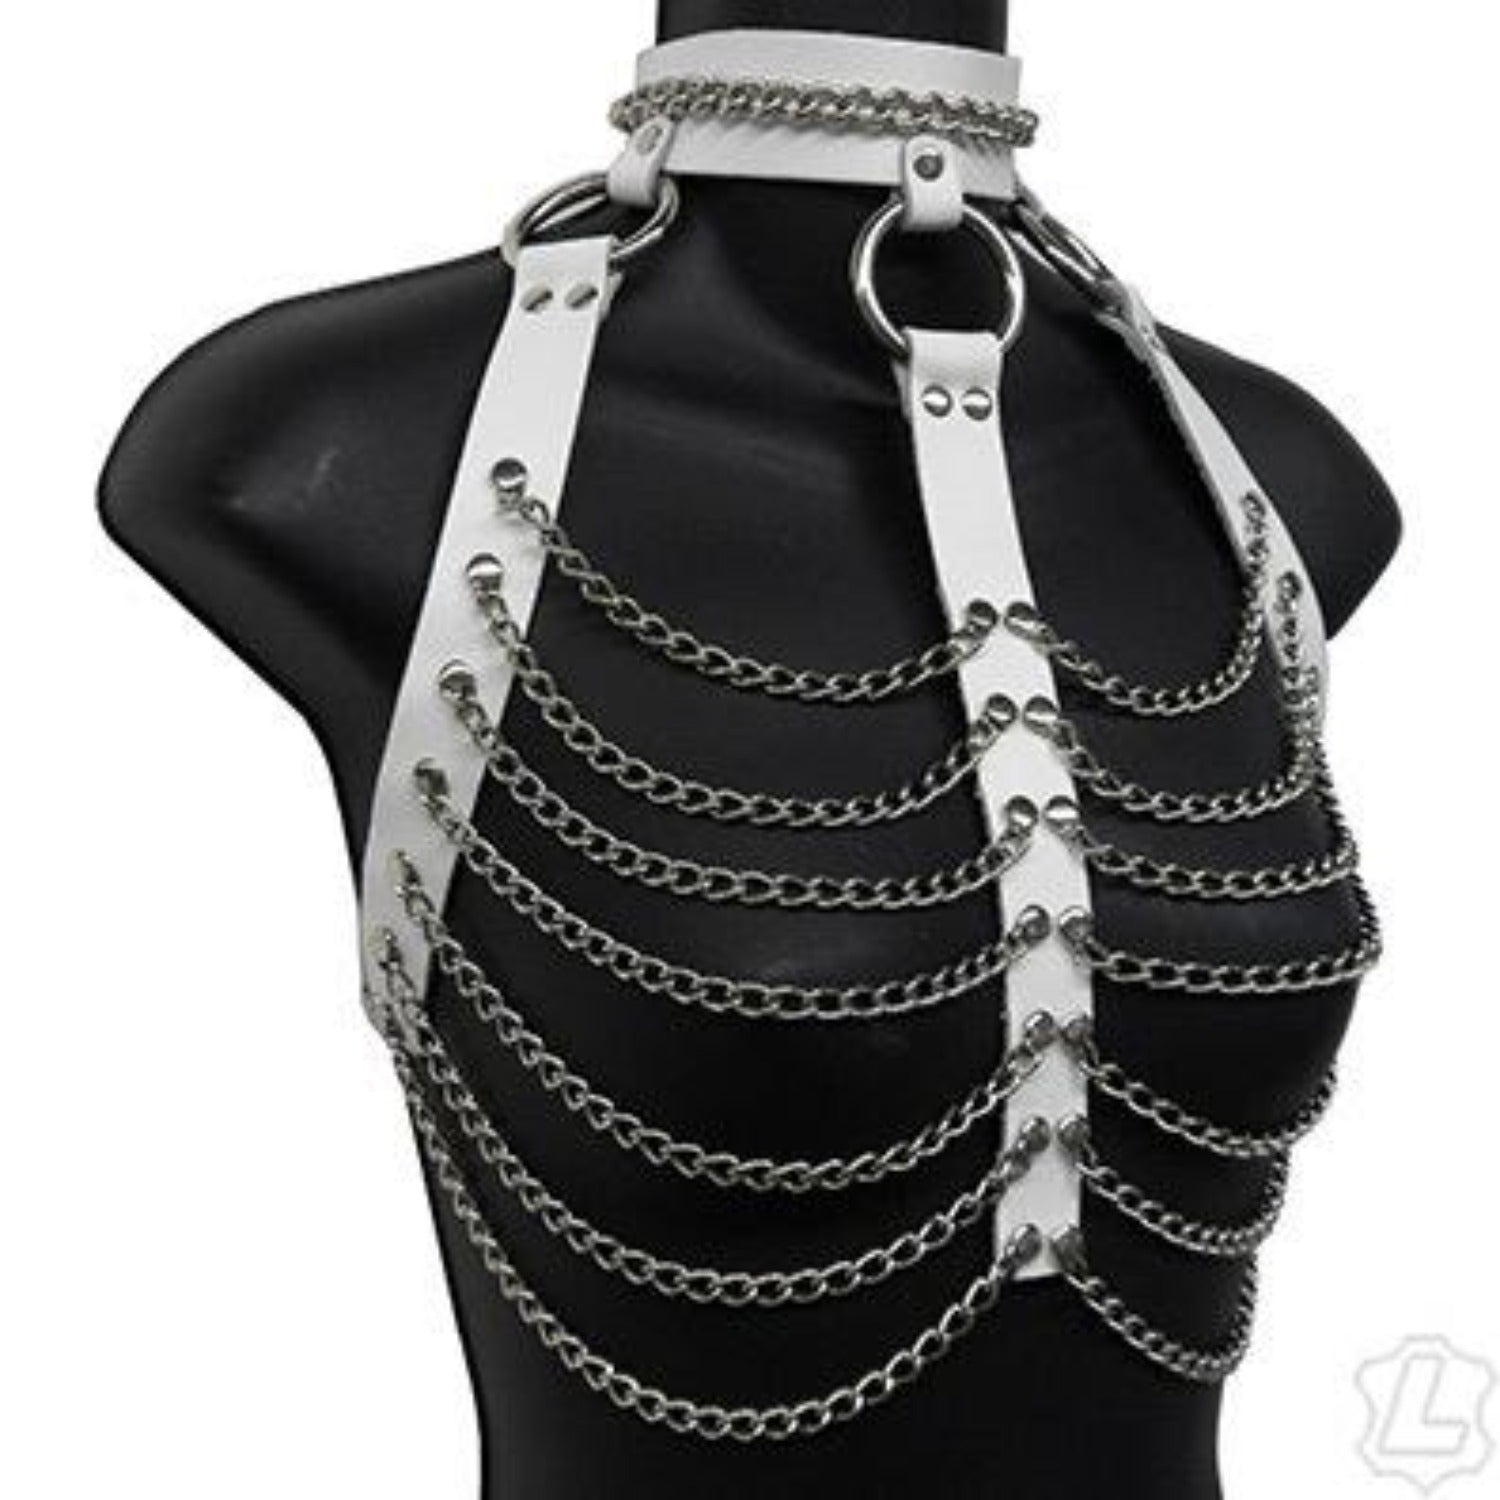 The white leather and chain three column halter harness on a mannequin.